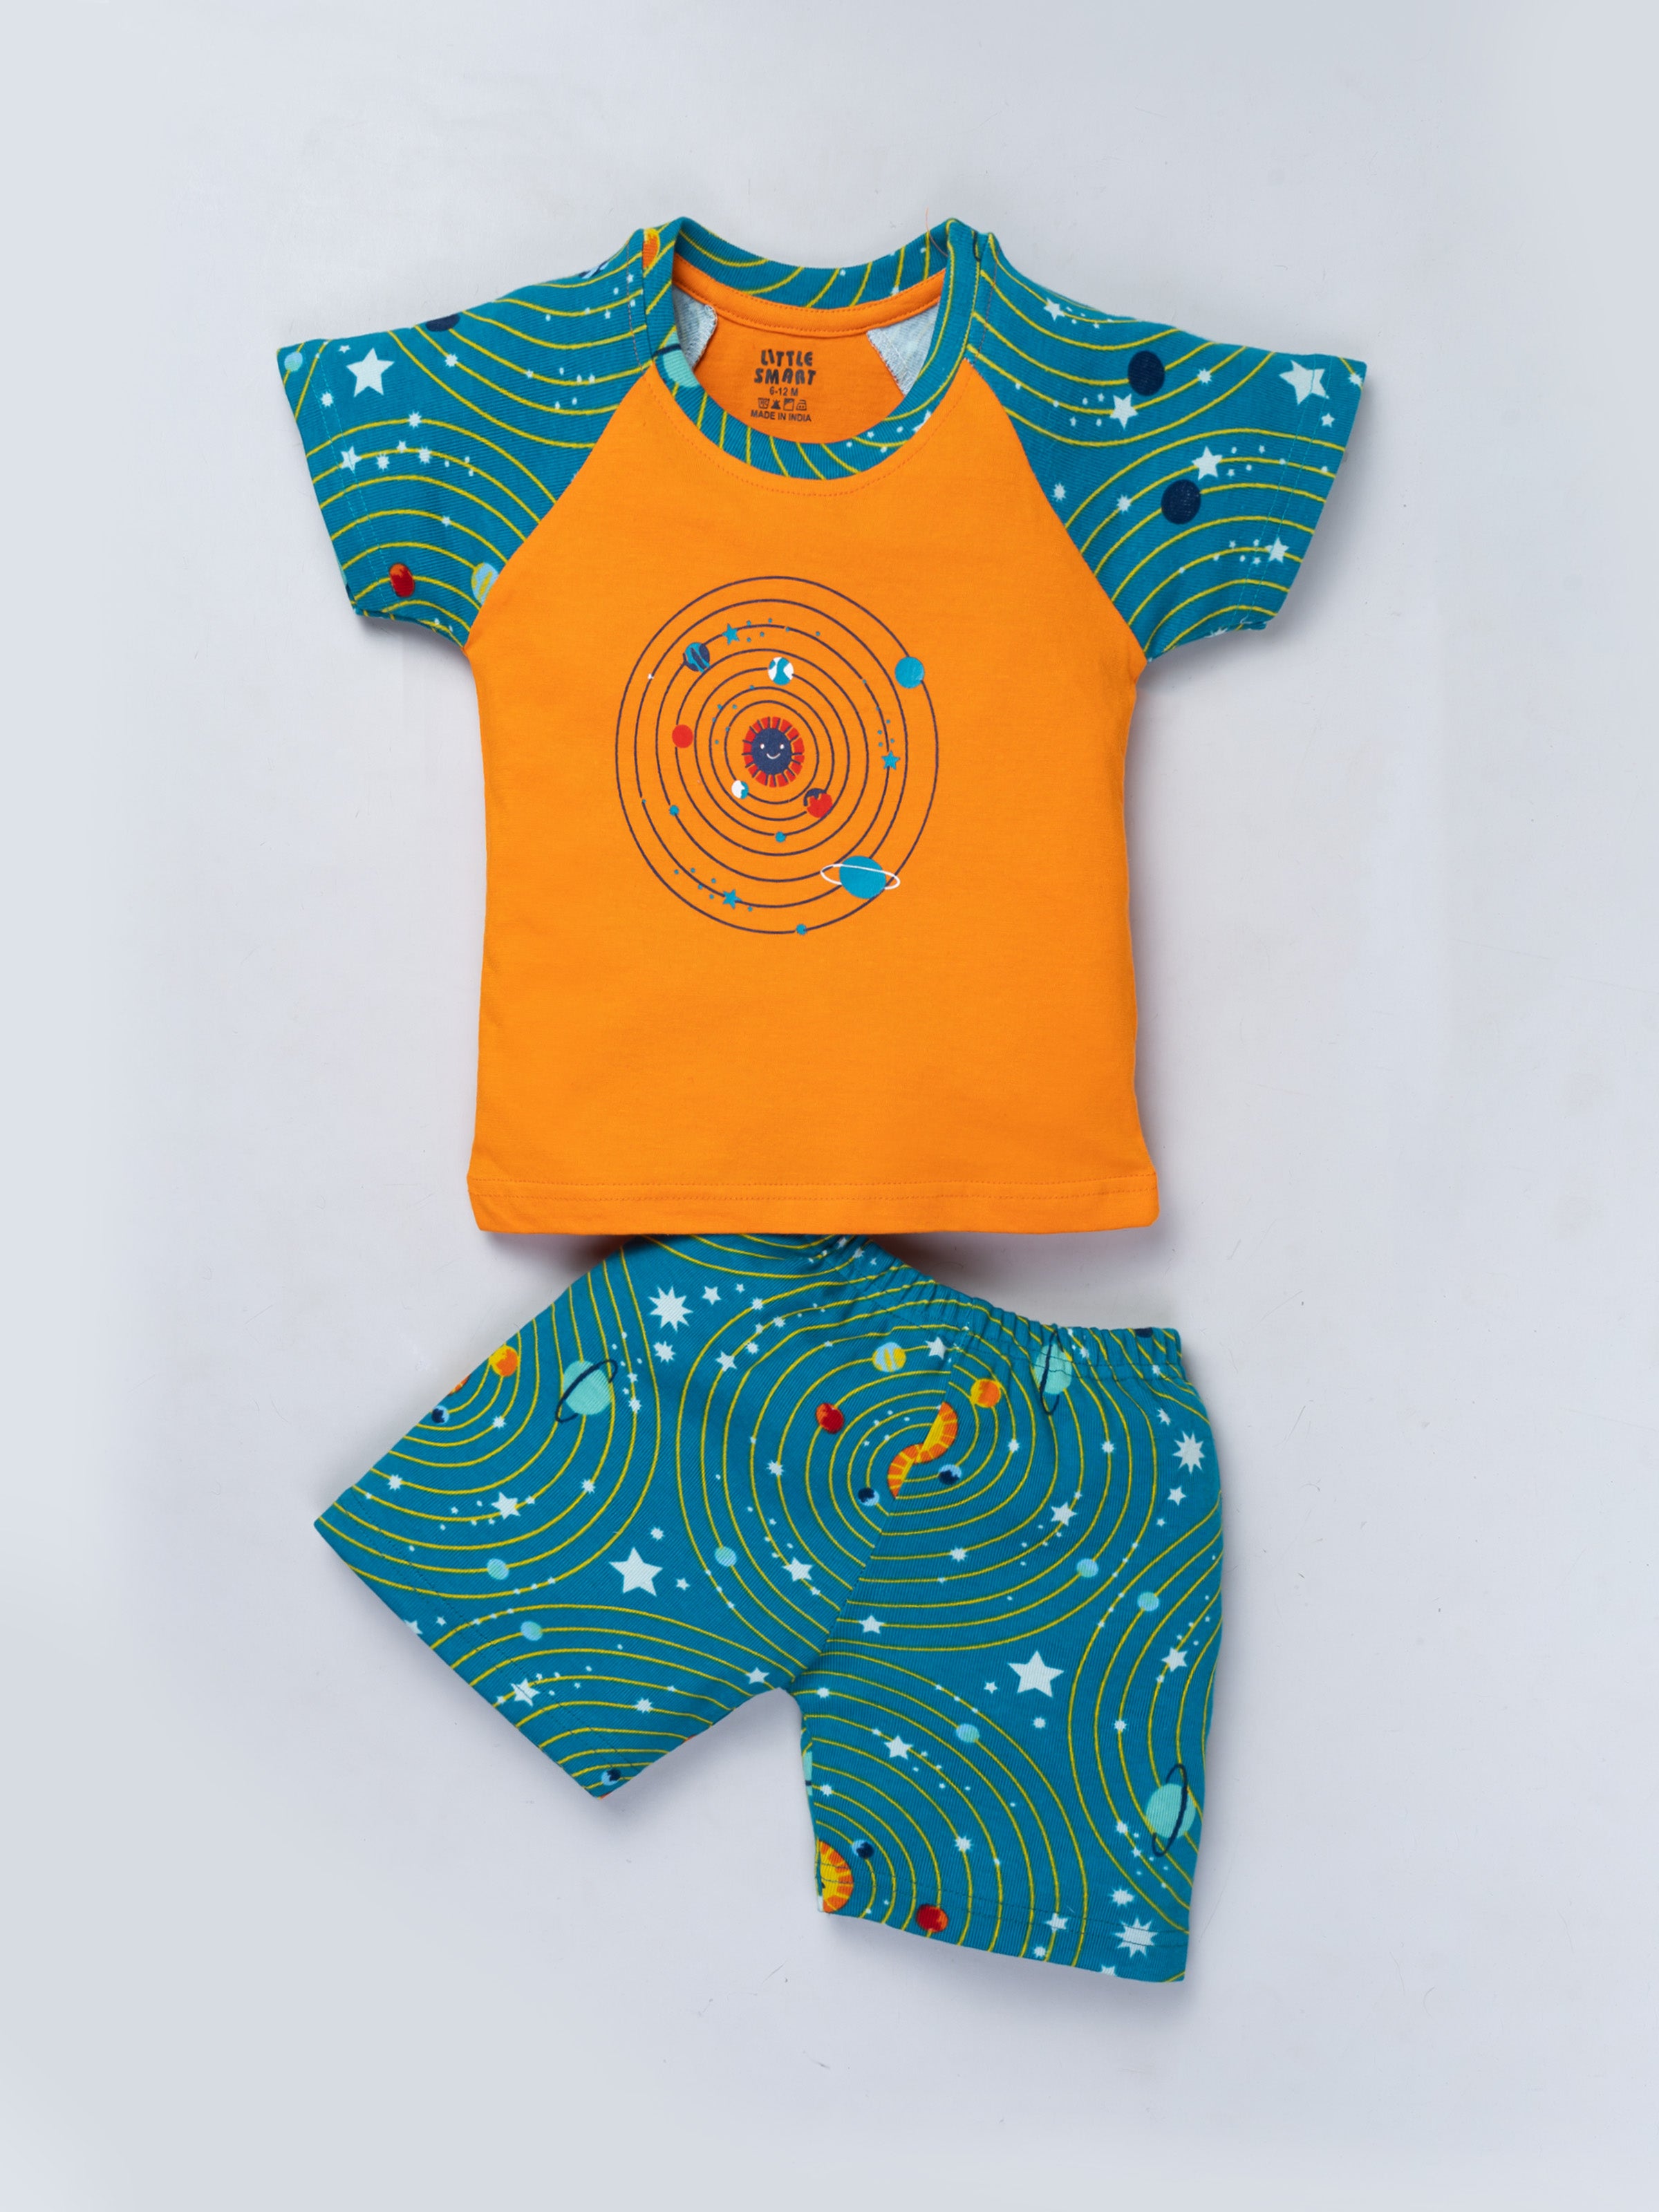 Buy Niv Enterprise Baby Boys Party Ware Cotton 3 Piece Baba Suit Set Multi  Color Multiple Size. (3-4 Year) at Amazon.in